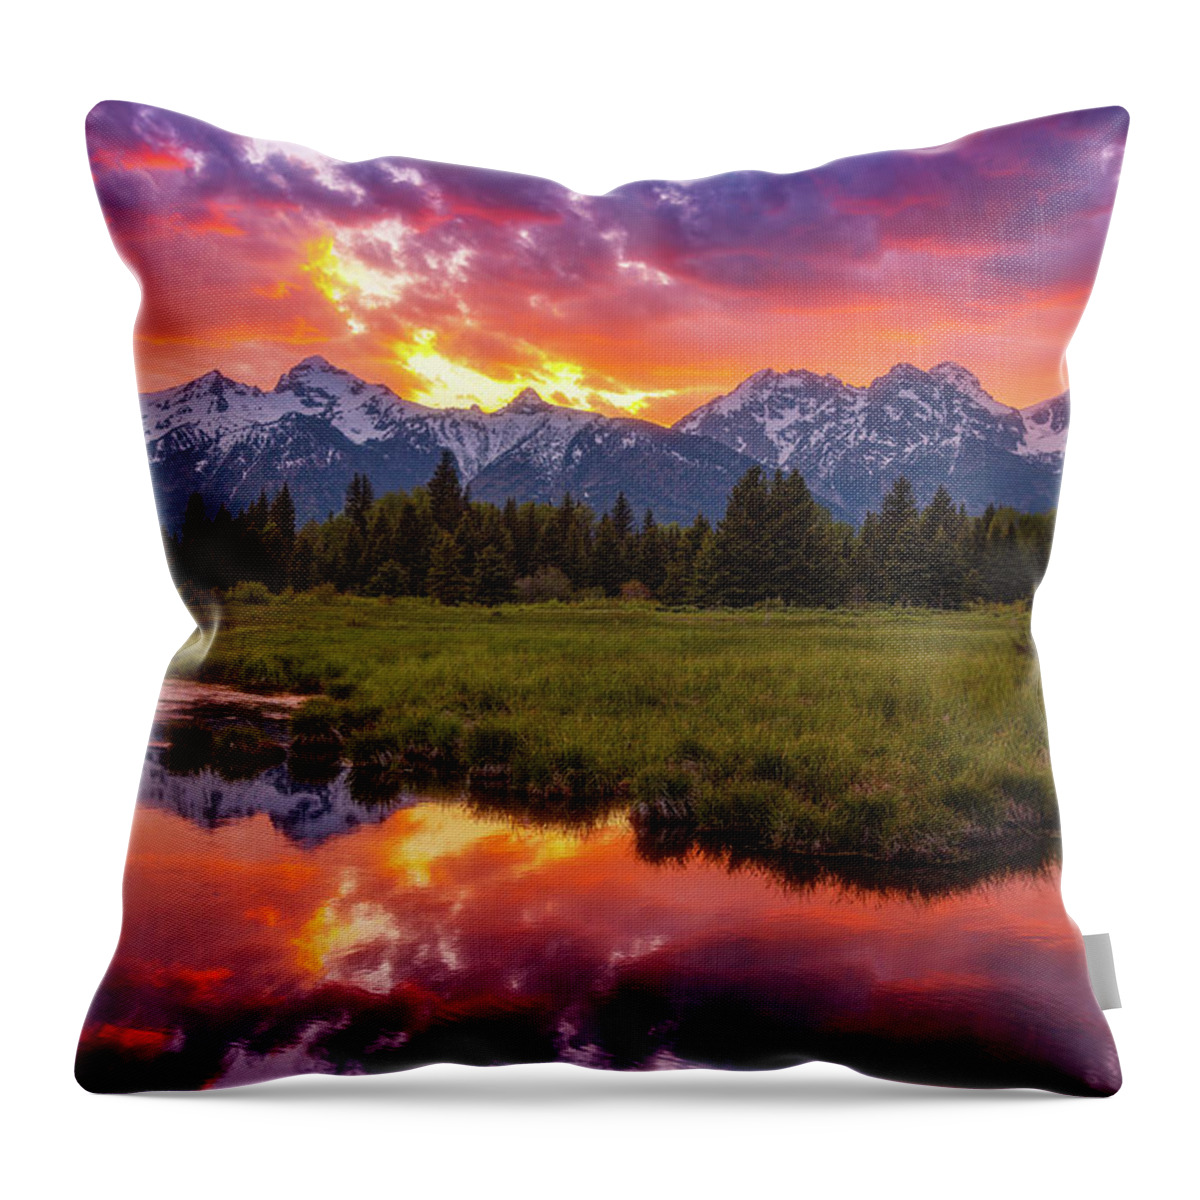 Sunsets Throw Pillow featuring the photograph Black Ponds Sunset by Darren White